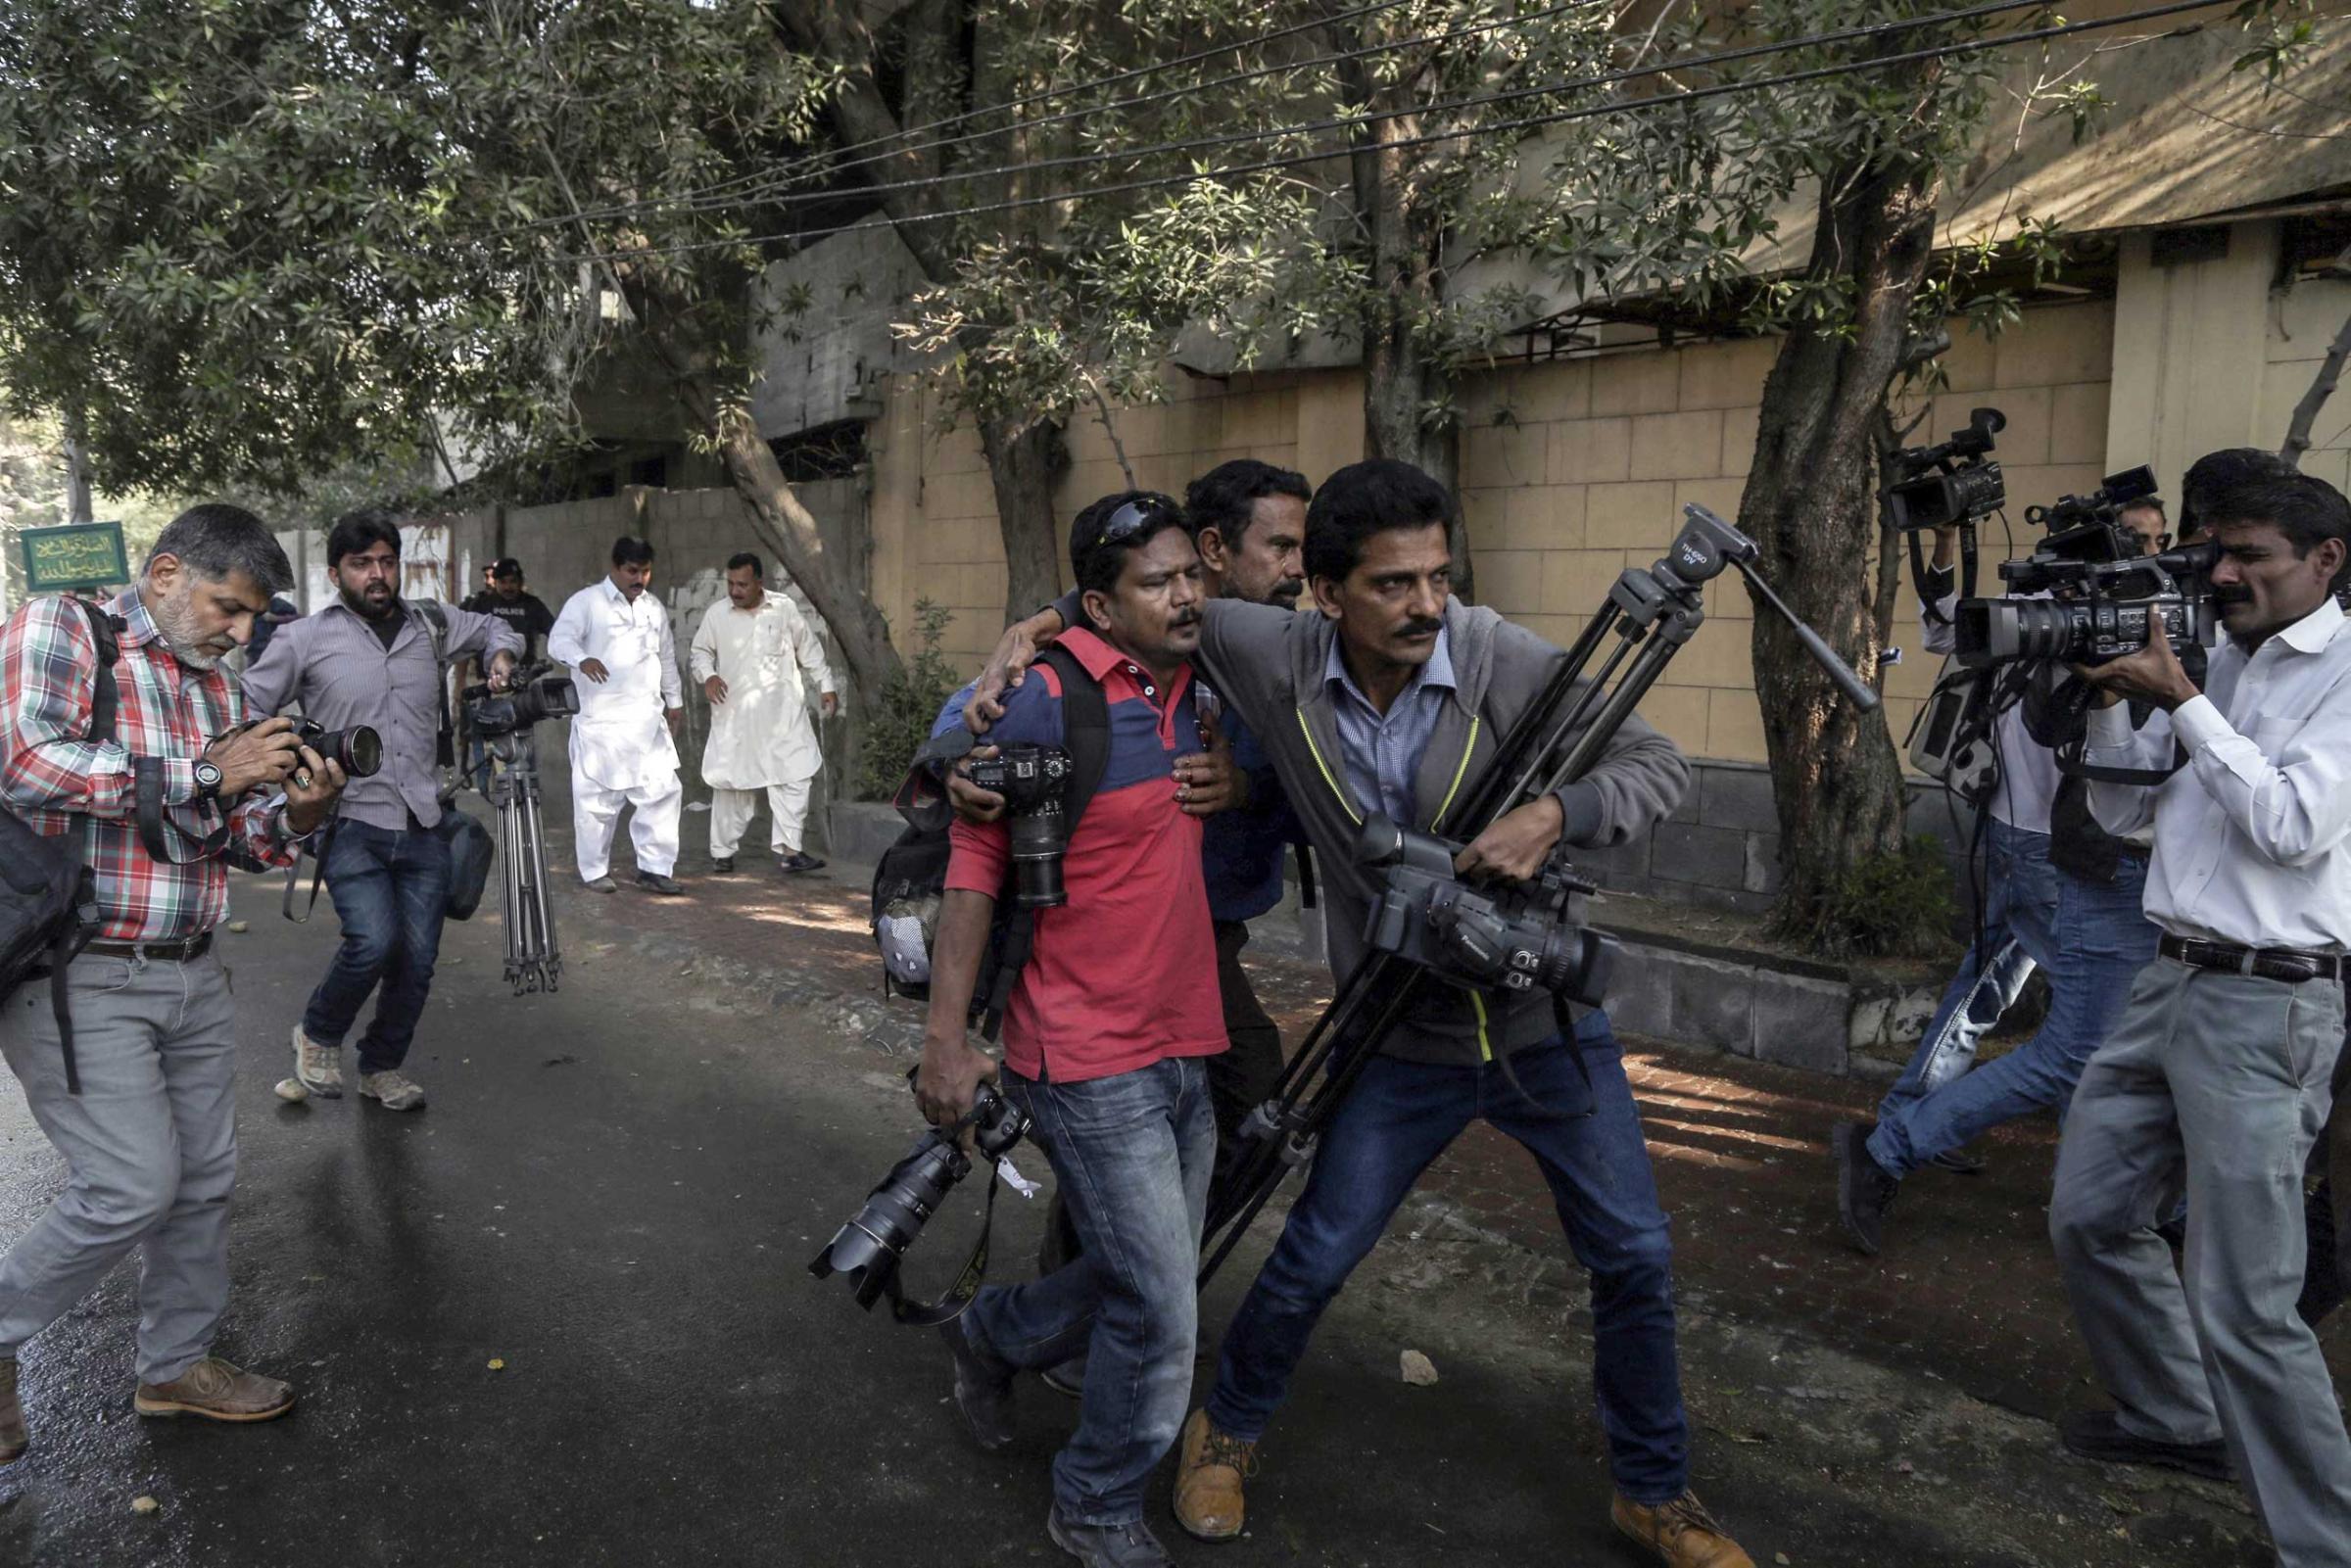 Pakistani journalists help a colleague who was injured in clashes between police and the supporters of Islamic political party Jamat-e-Islami during a protest against the French magzine 'Charlie Hebdo' for publishing the caricatures of the prophet Muhammad, in Karachi, Pakistan on Jan. 16, 2015.